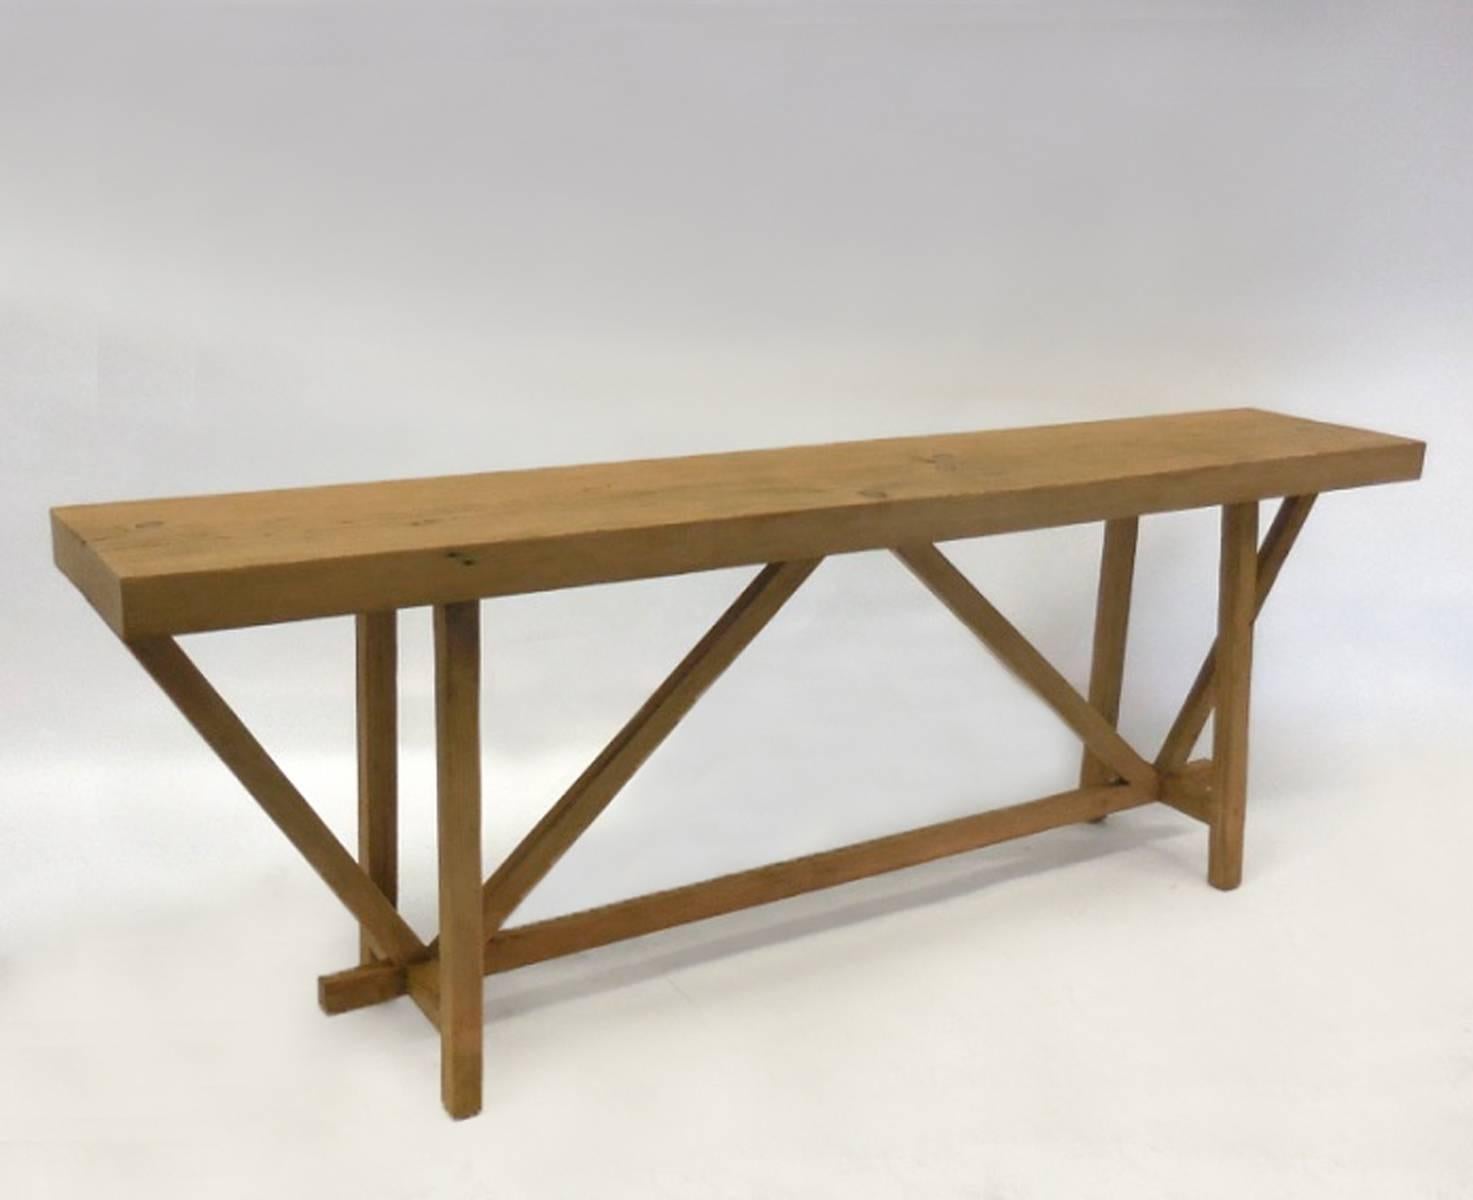 Douglas fir wood console table with buttress style base. Top measures about 2.75 inches to 3 inches thick. Can also be made in custom sizes and finishes.  Made in Los Angeles by Dos Gallos Studio.
PRICES ARE SUBJECT TO CHANGE. PLEASE INQUIRE BEFORE